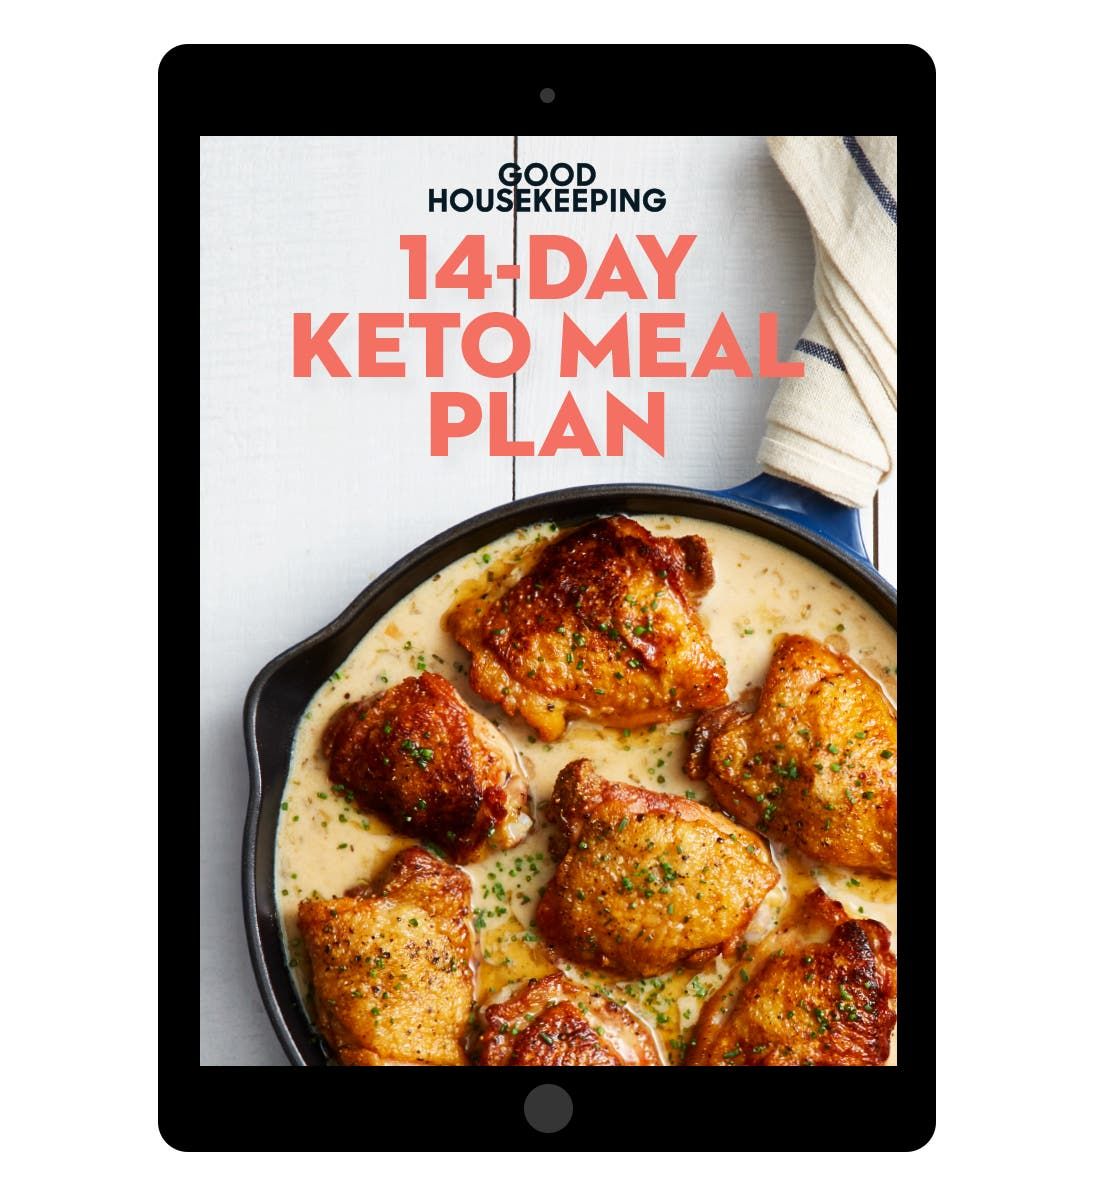 14-Day Keto Meal Plan: 30+ Keto Recipes from Good Housekeeping Shop